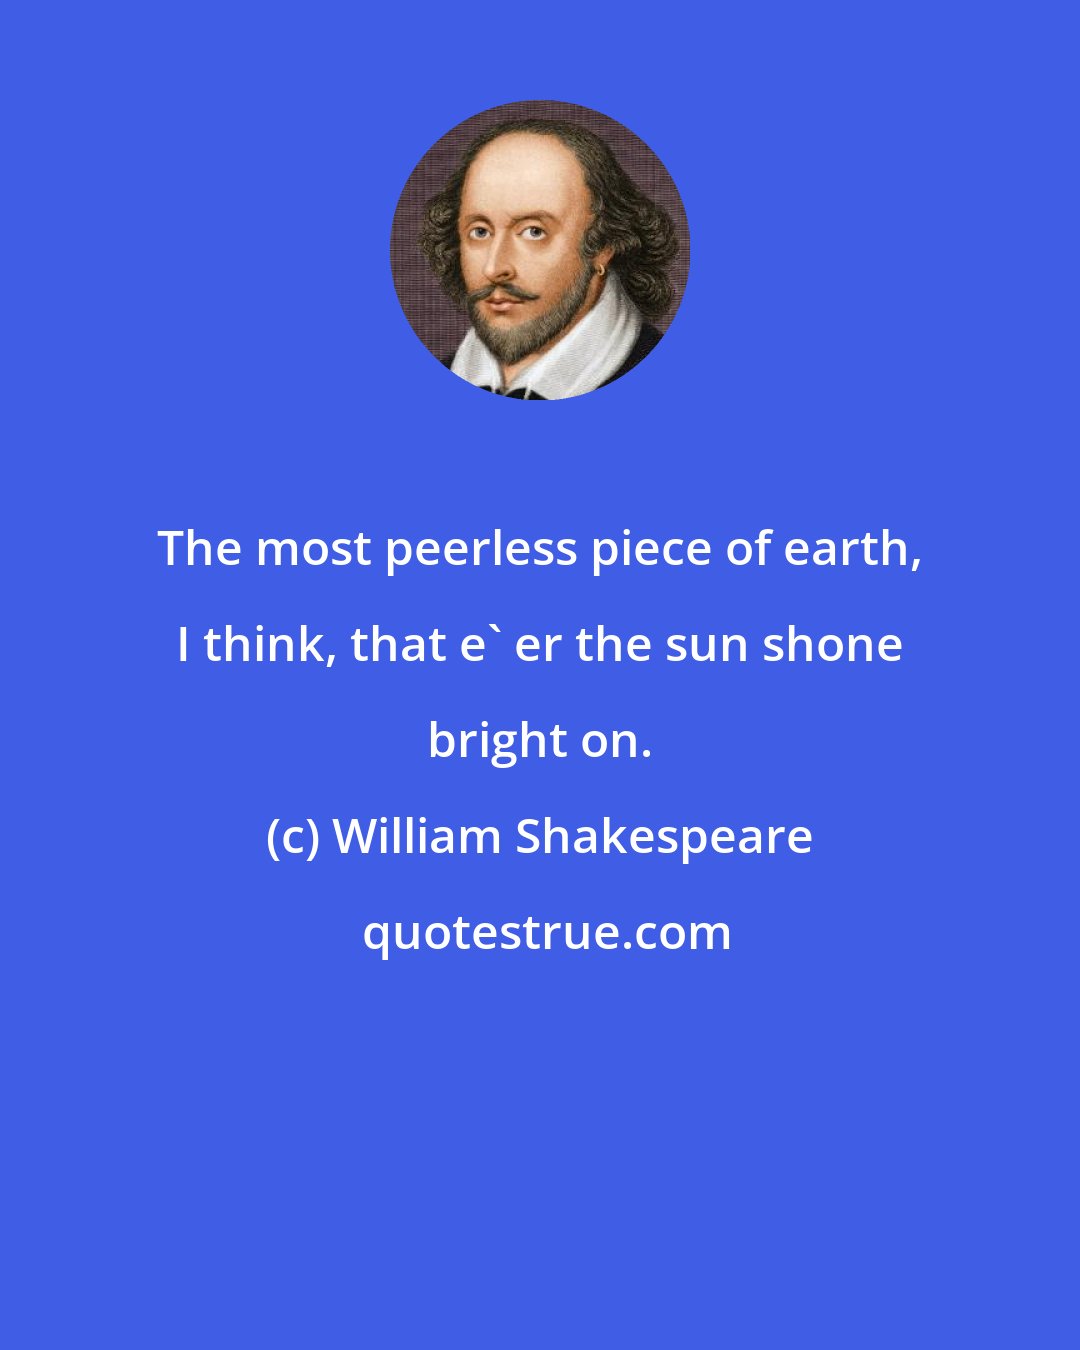 William Shakespeare: The most peerless piece of earth, I think, that e' er the sun shone bright on.